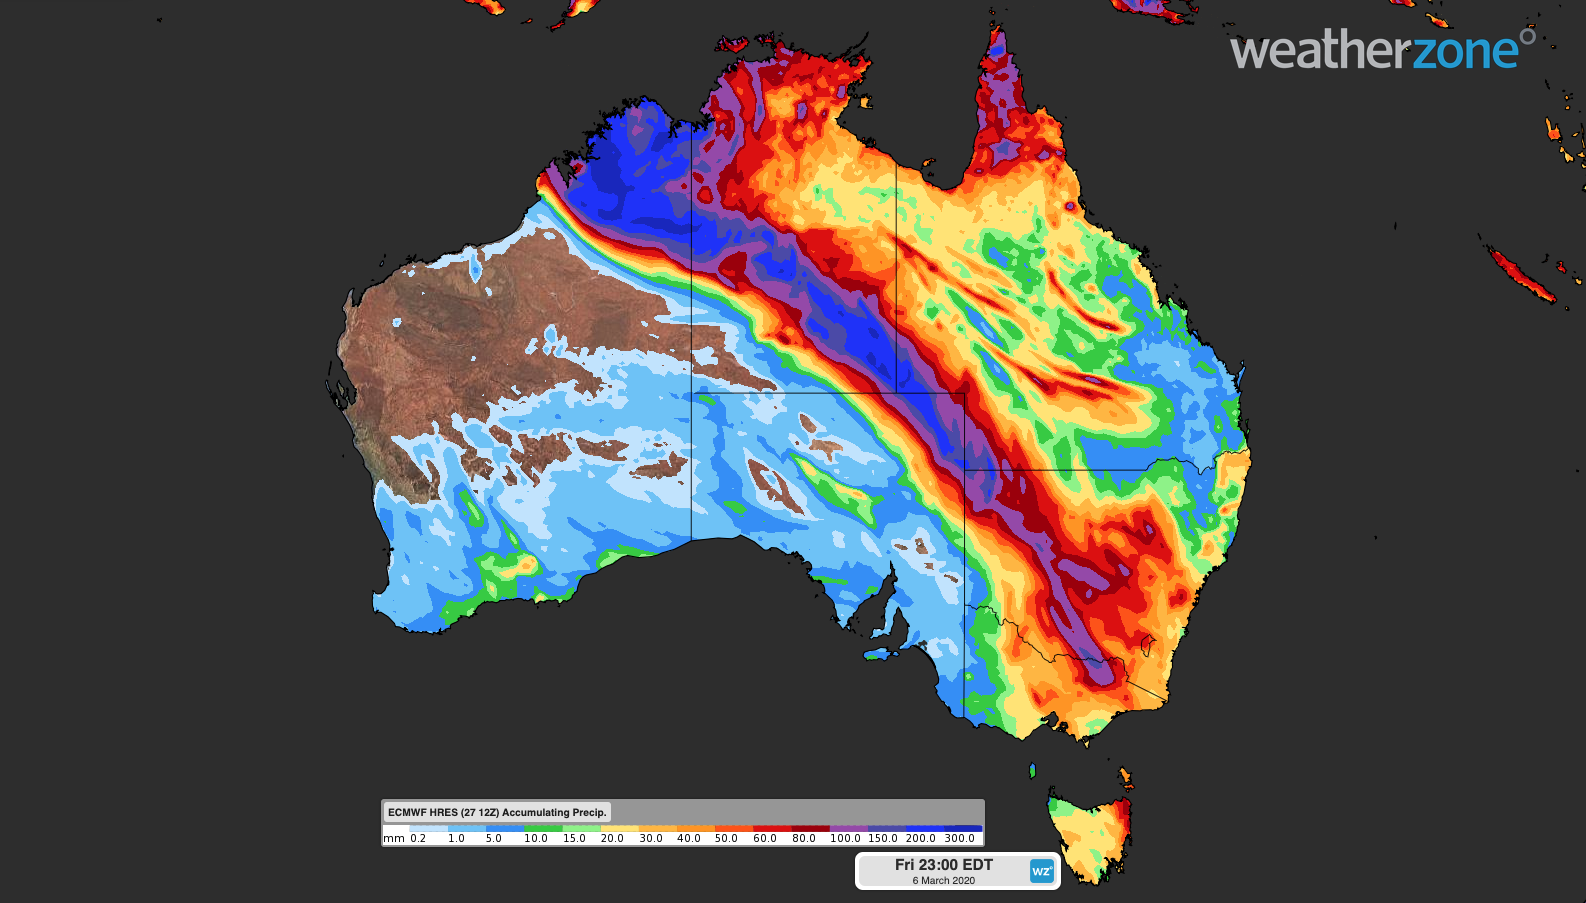 Rain potential for Red Centre and Murray Darling Basin